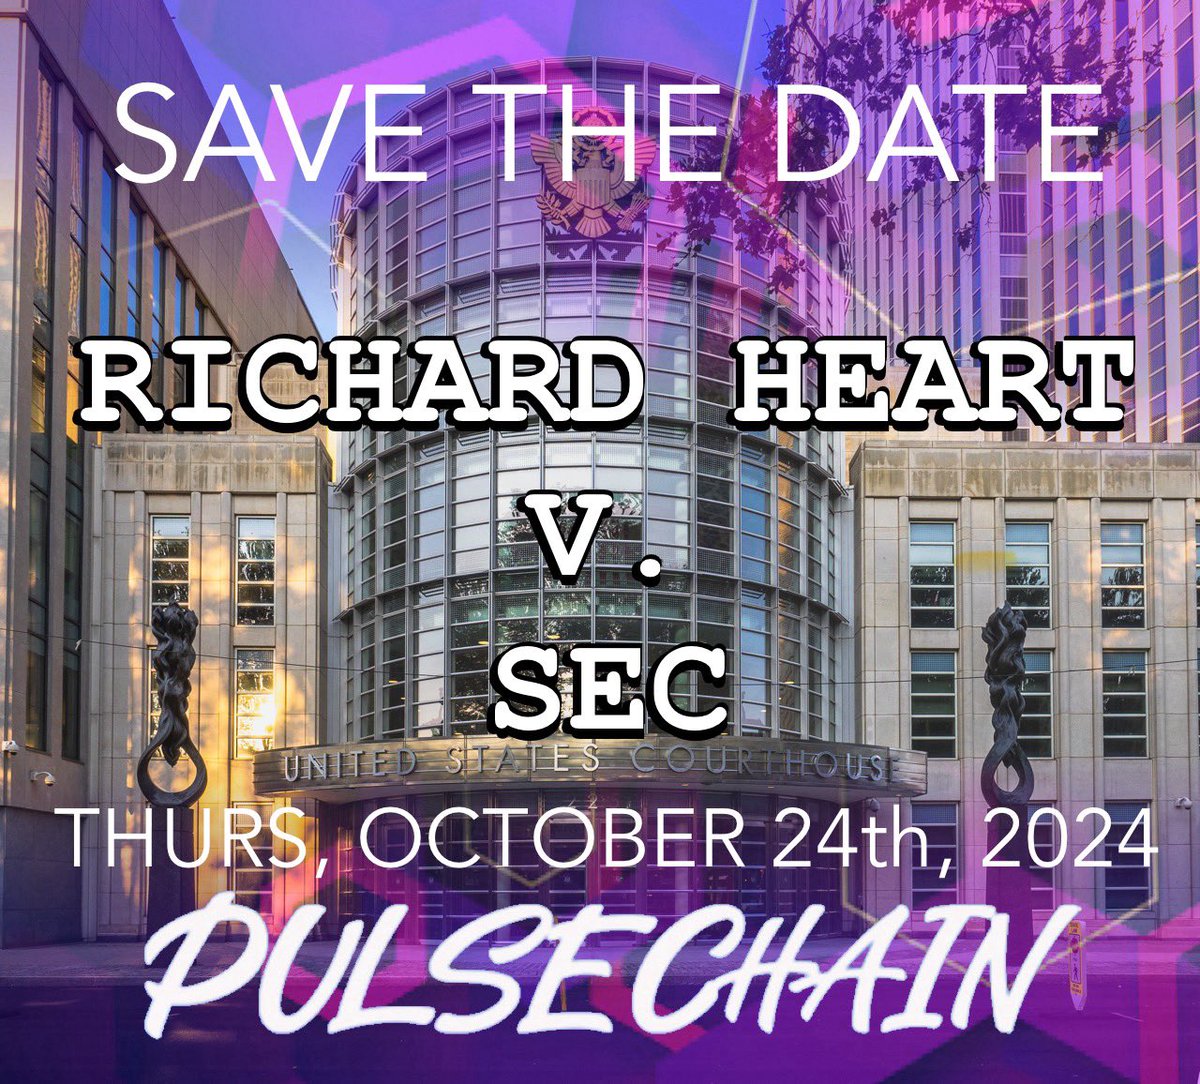 Pls set up thee @GOPMajorityWhip meeting @HPulserica. And inform Majority Whip Congressman Tom Emmer thee ‘Richard Heart v. SEC’ case is thee strongest most winnable case in crypto, that will set positive precedent for all his constituents. It should literally be an easy Yes lolz